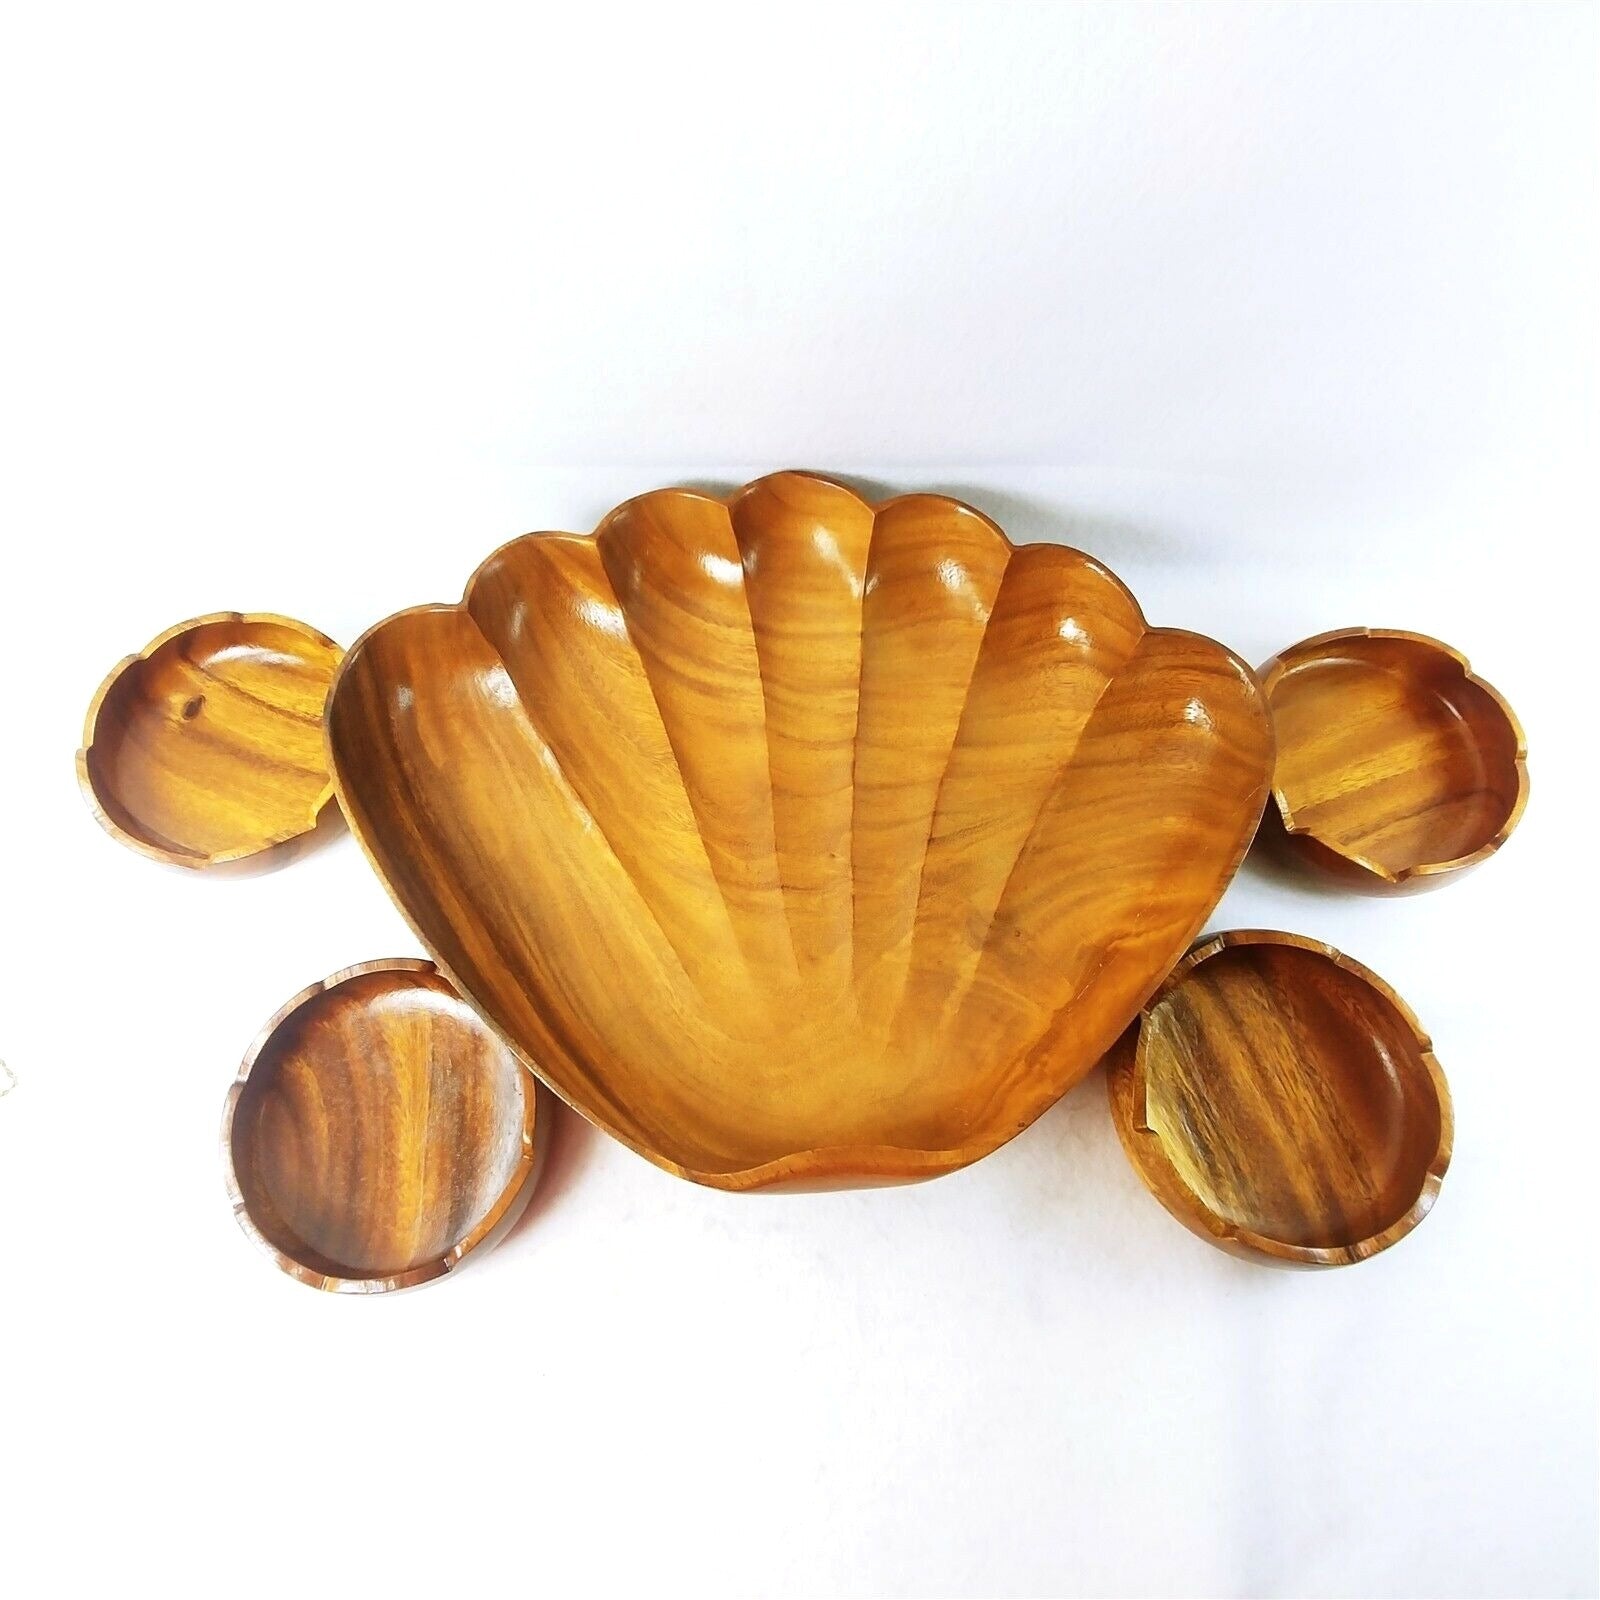 Salad Bowl 4 Serving Bowls Wooden Clam Shell Handcrafted Philippines